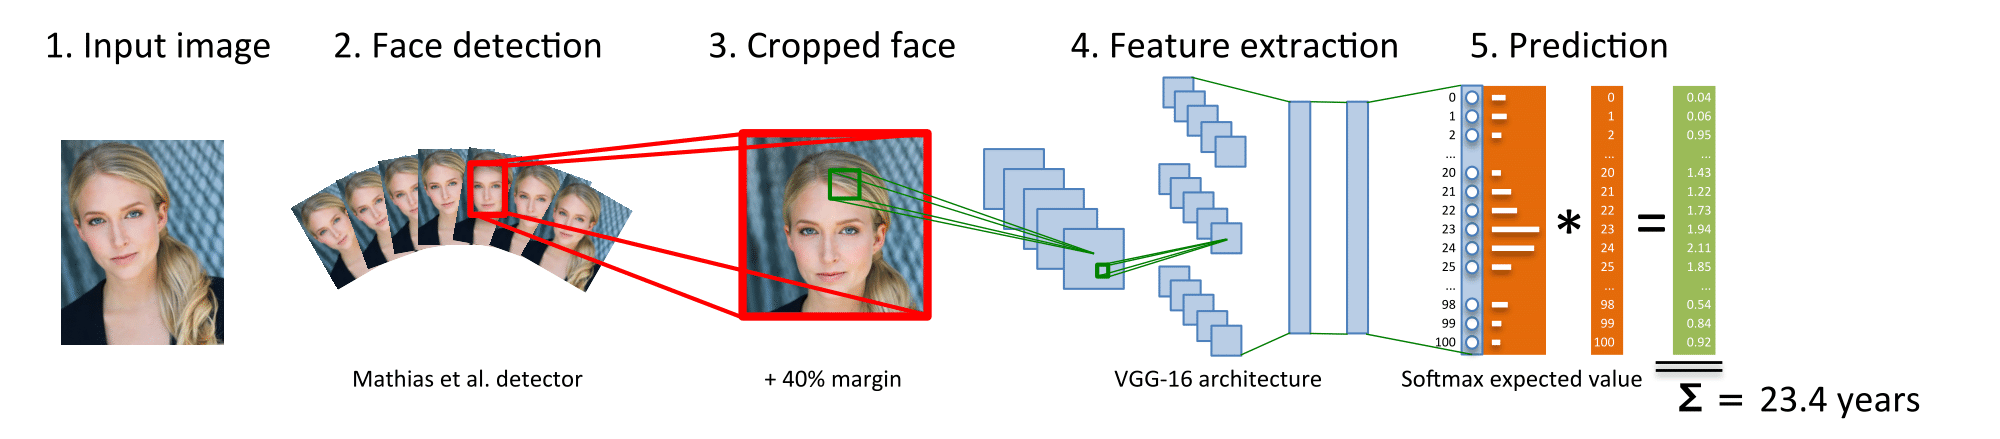 Zee-donk recommendet Neural facial processing